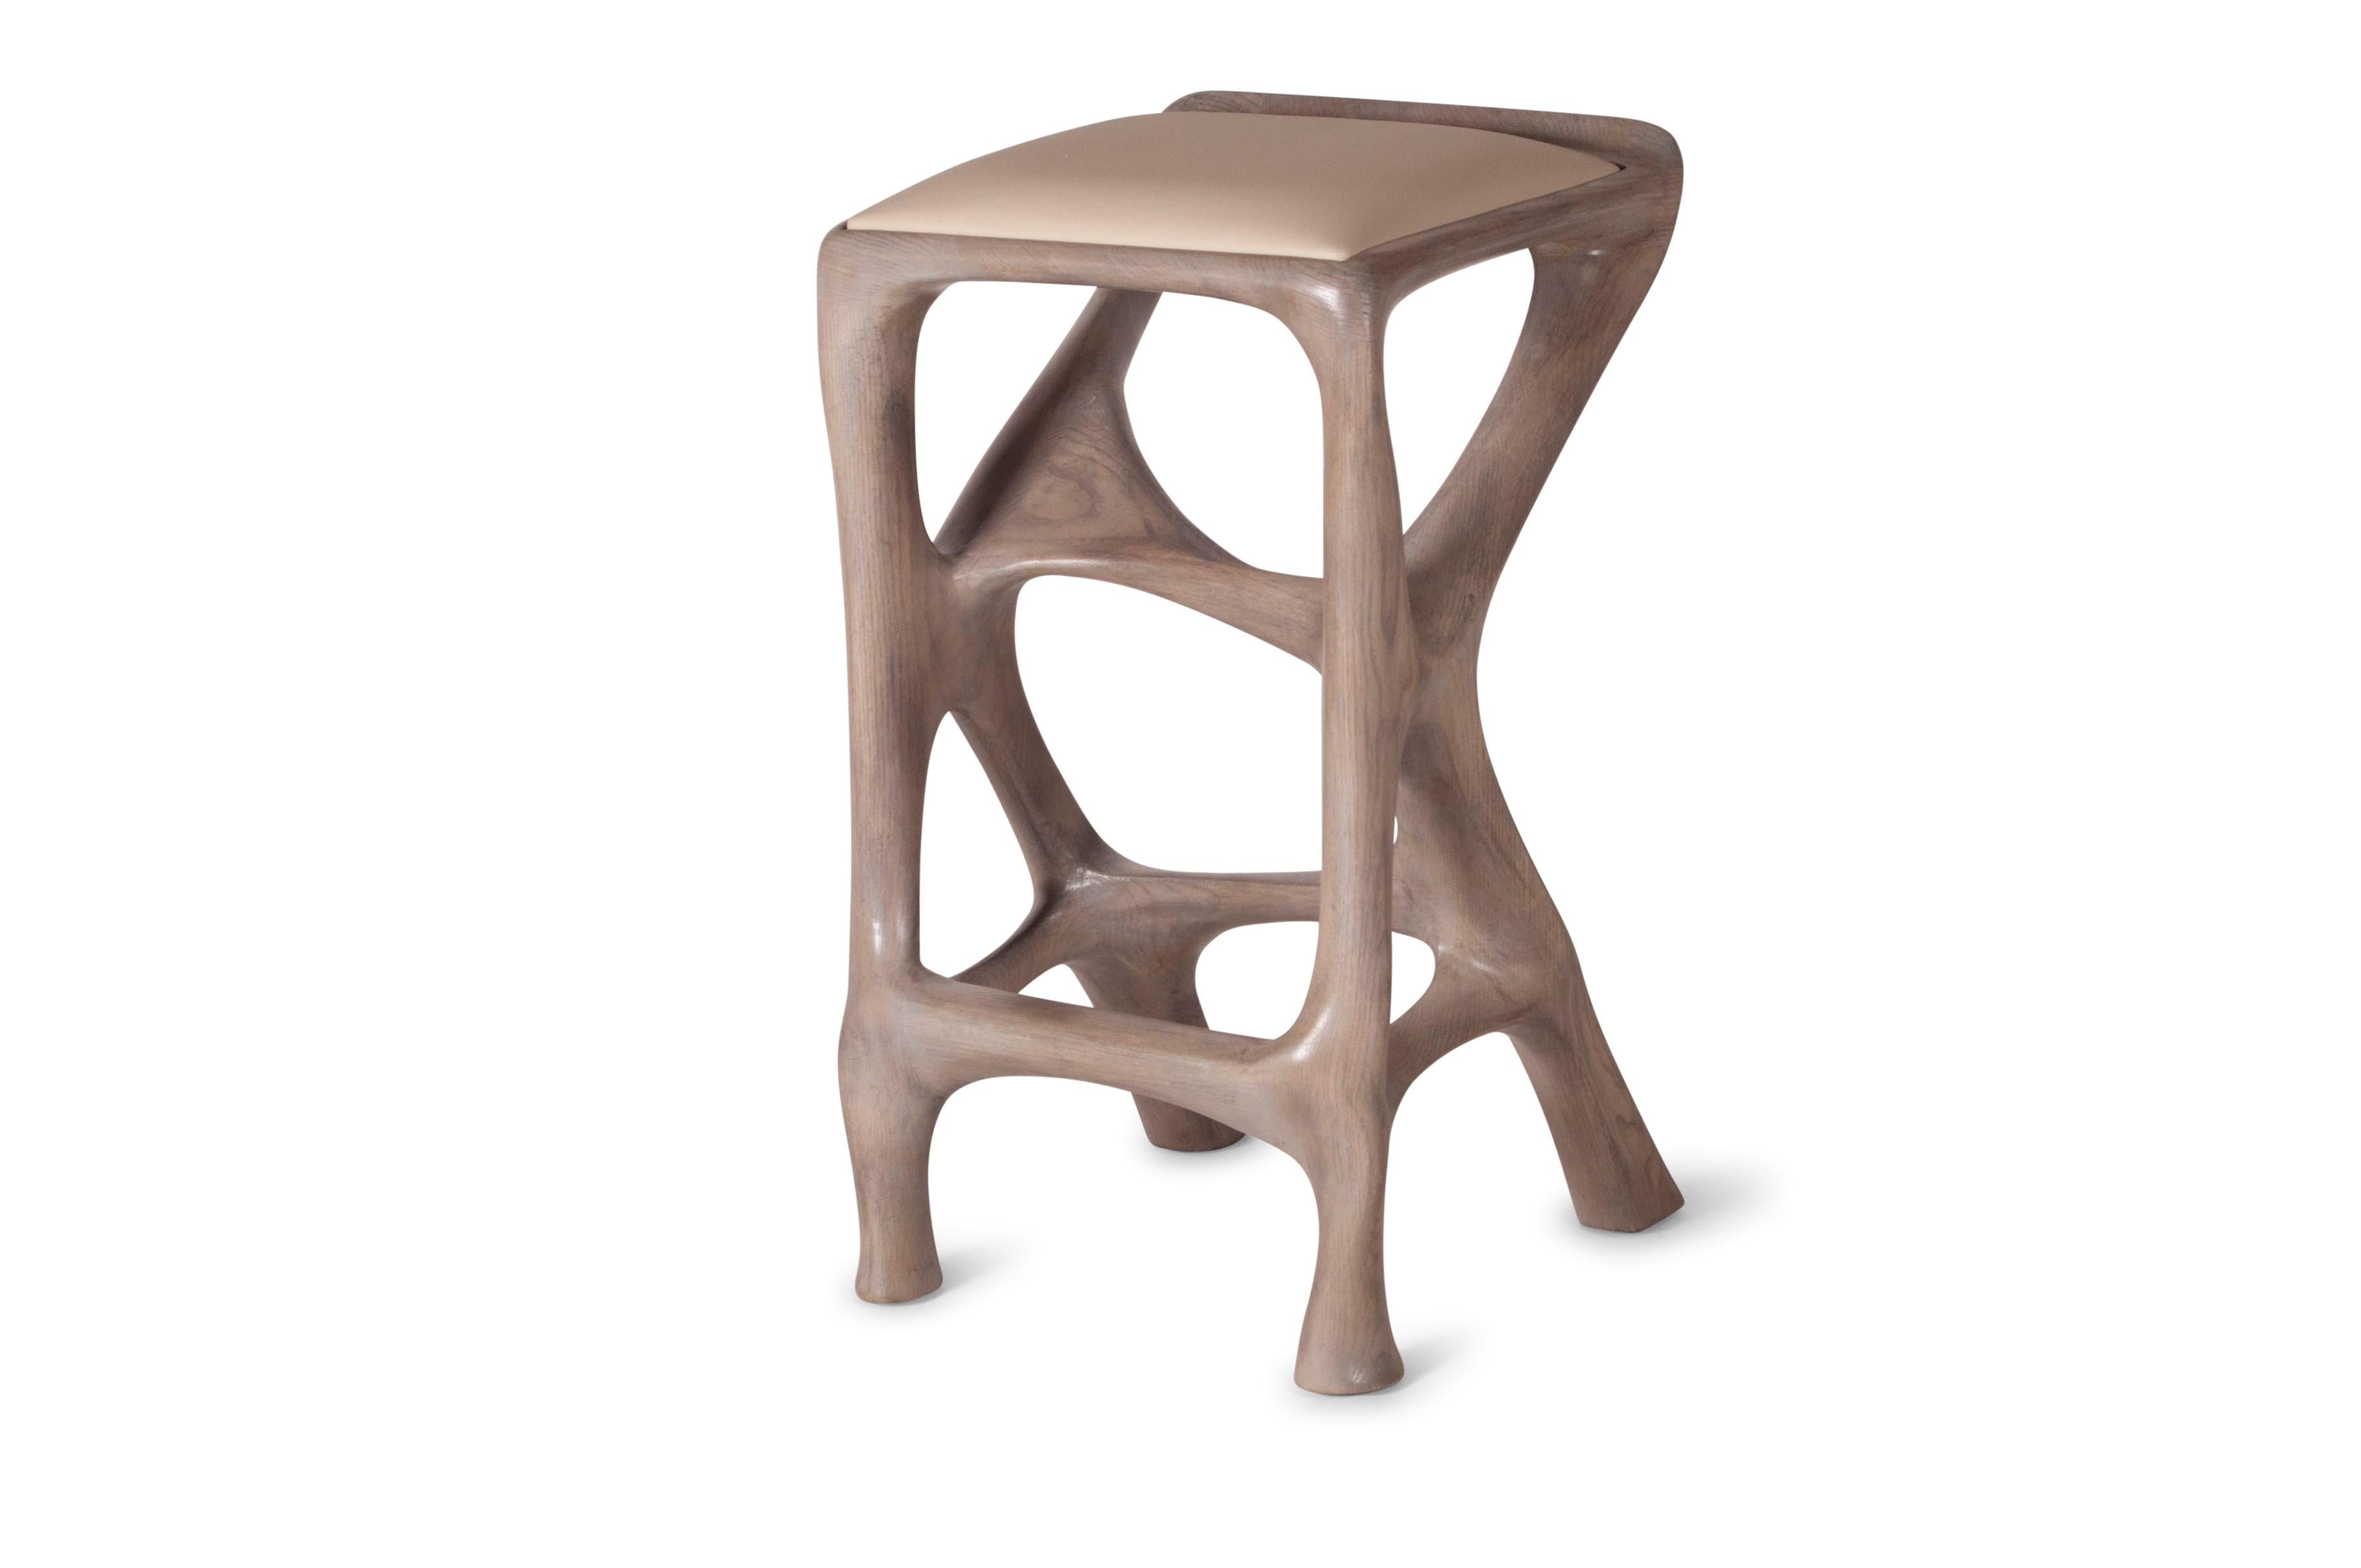 Modern Amorph Chimera Bar Stool in Gray Oak stain on Ash wood counter height For Sale